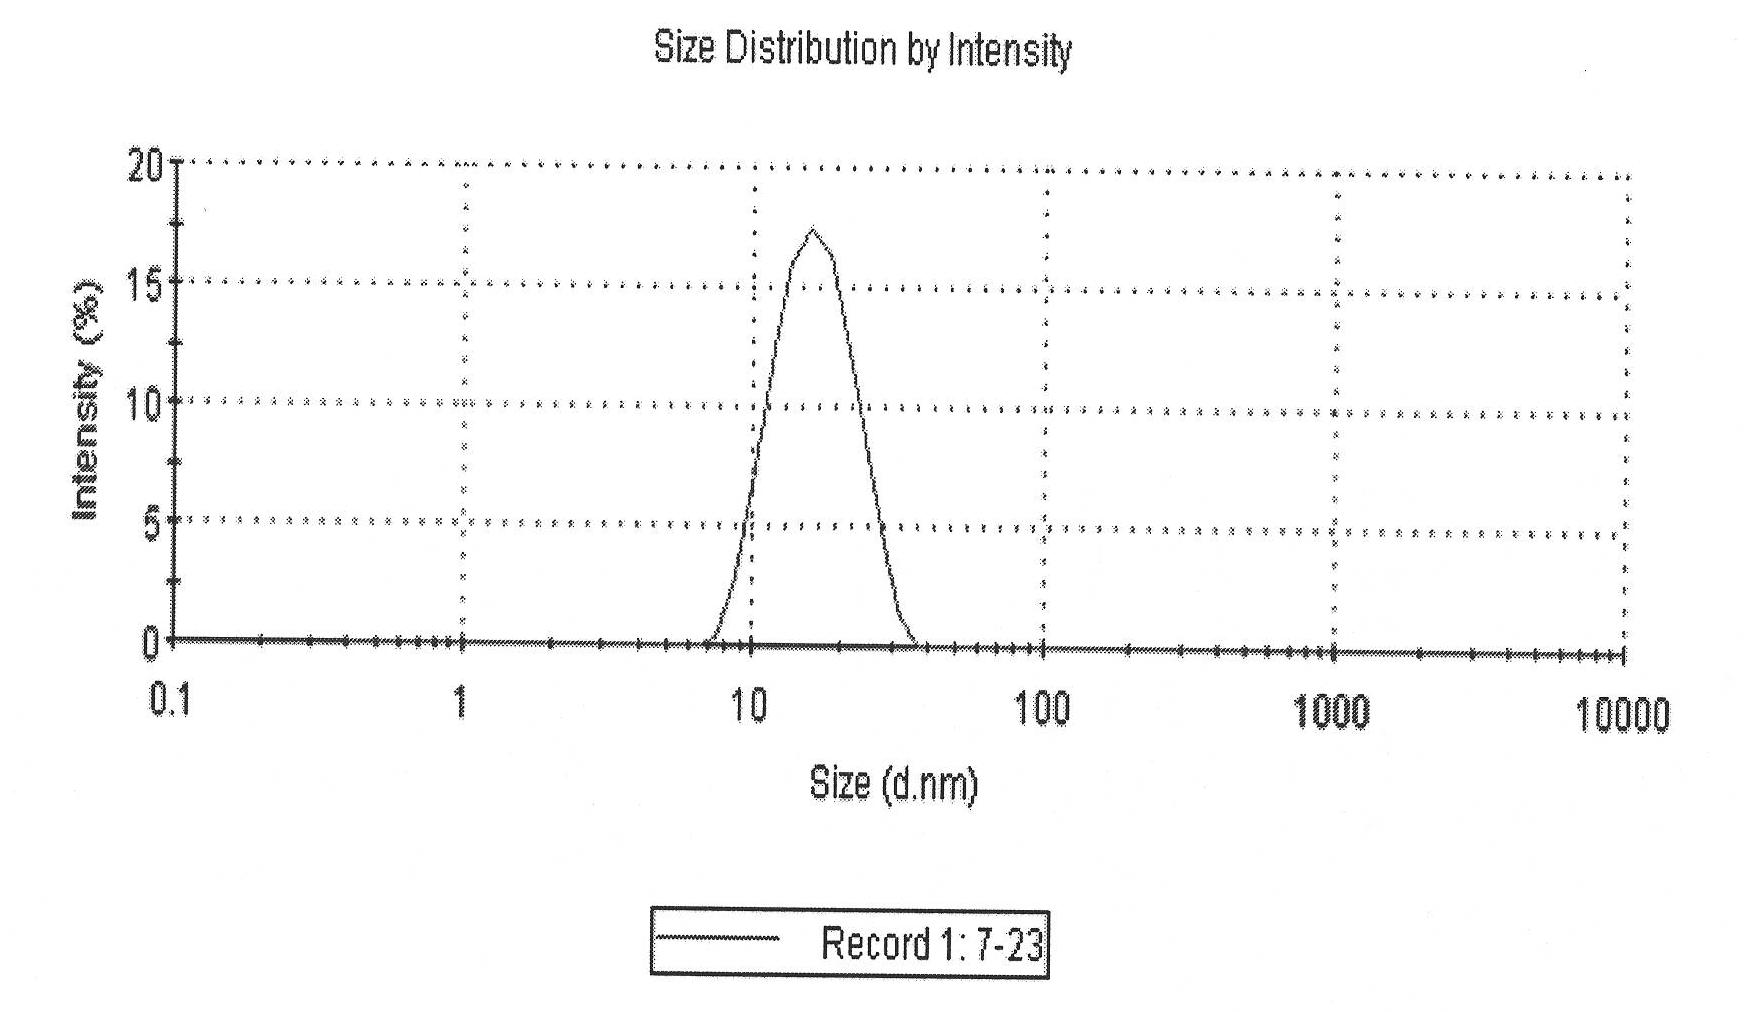 Compound Tilmicosin nanoemulsion antibacterial agent and preparation method thereof